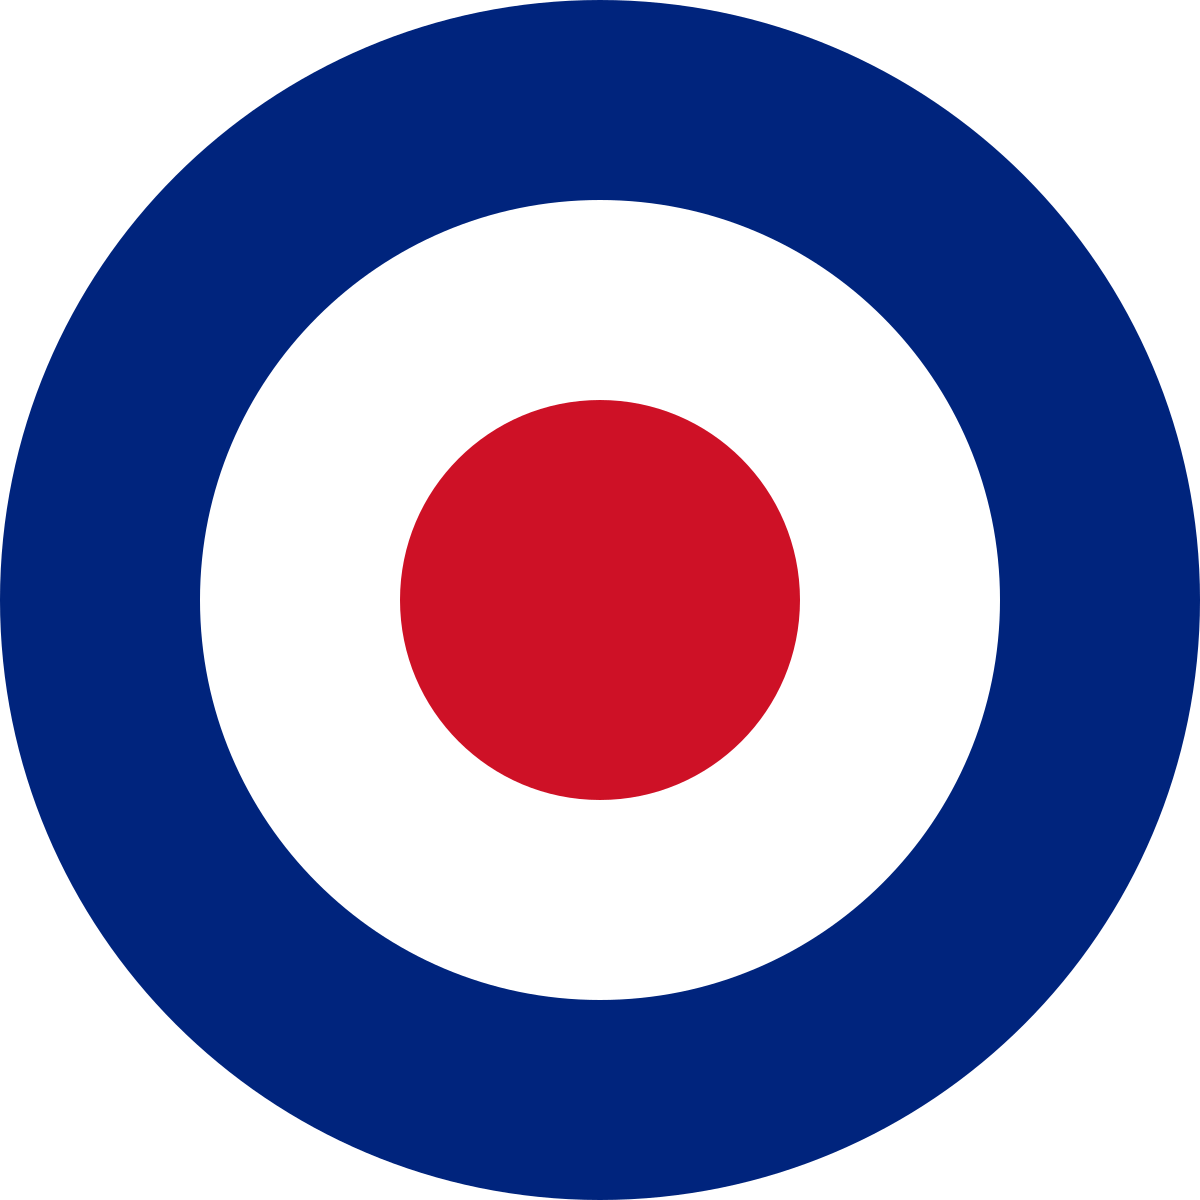 Blue and Red C Inside Diamond Logo - Royal Air Force roundels